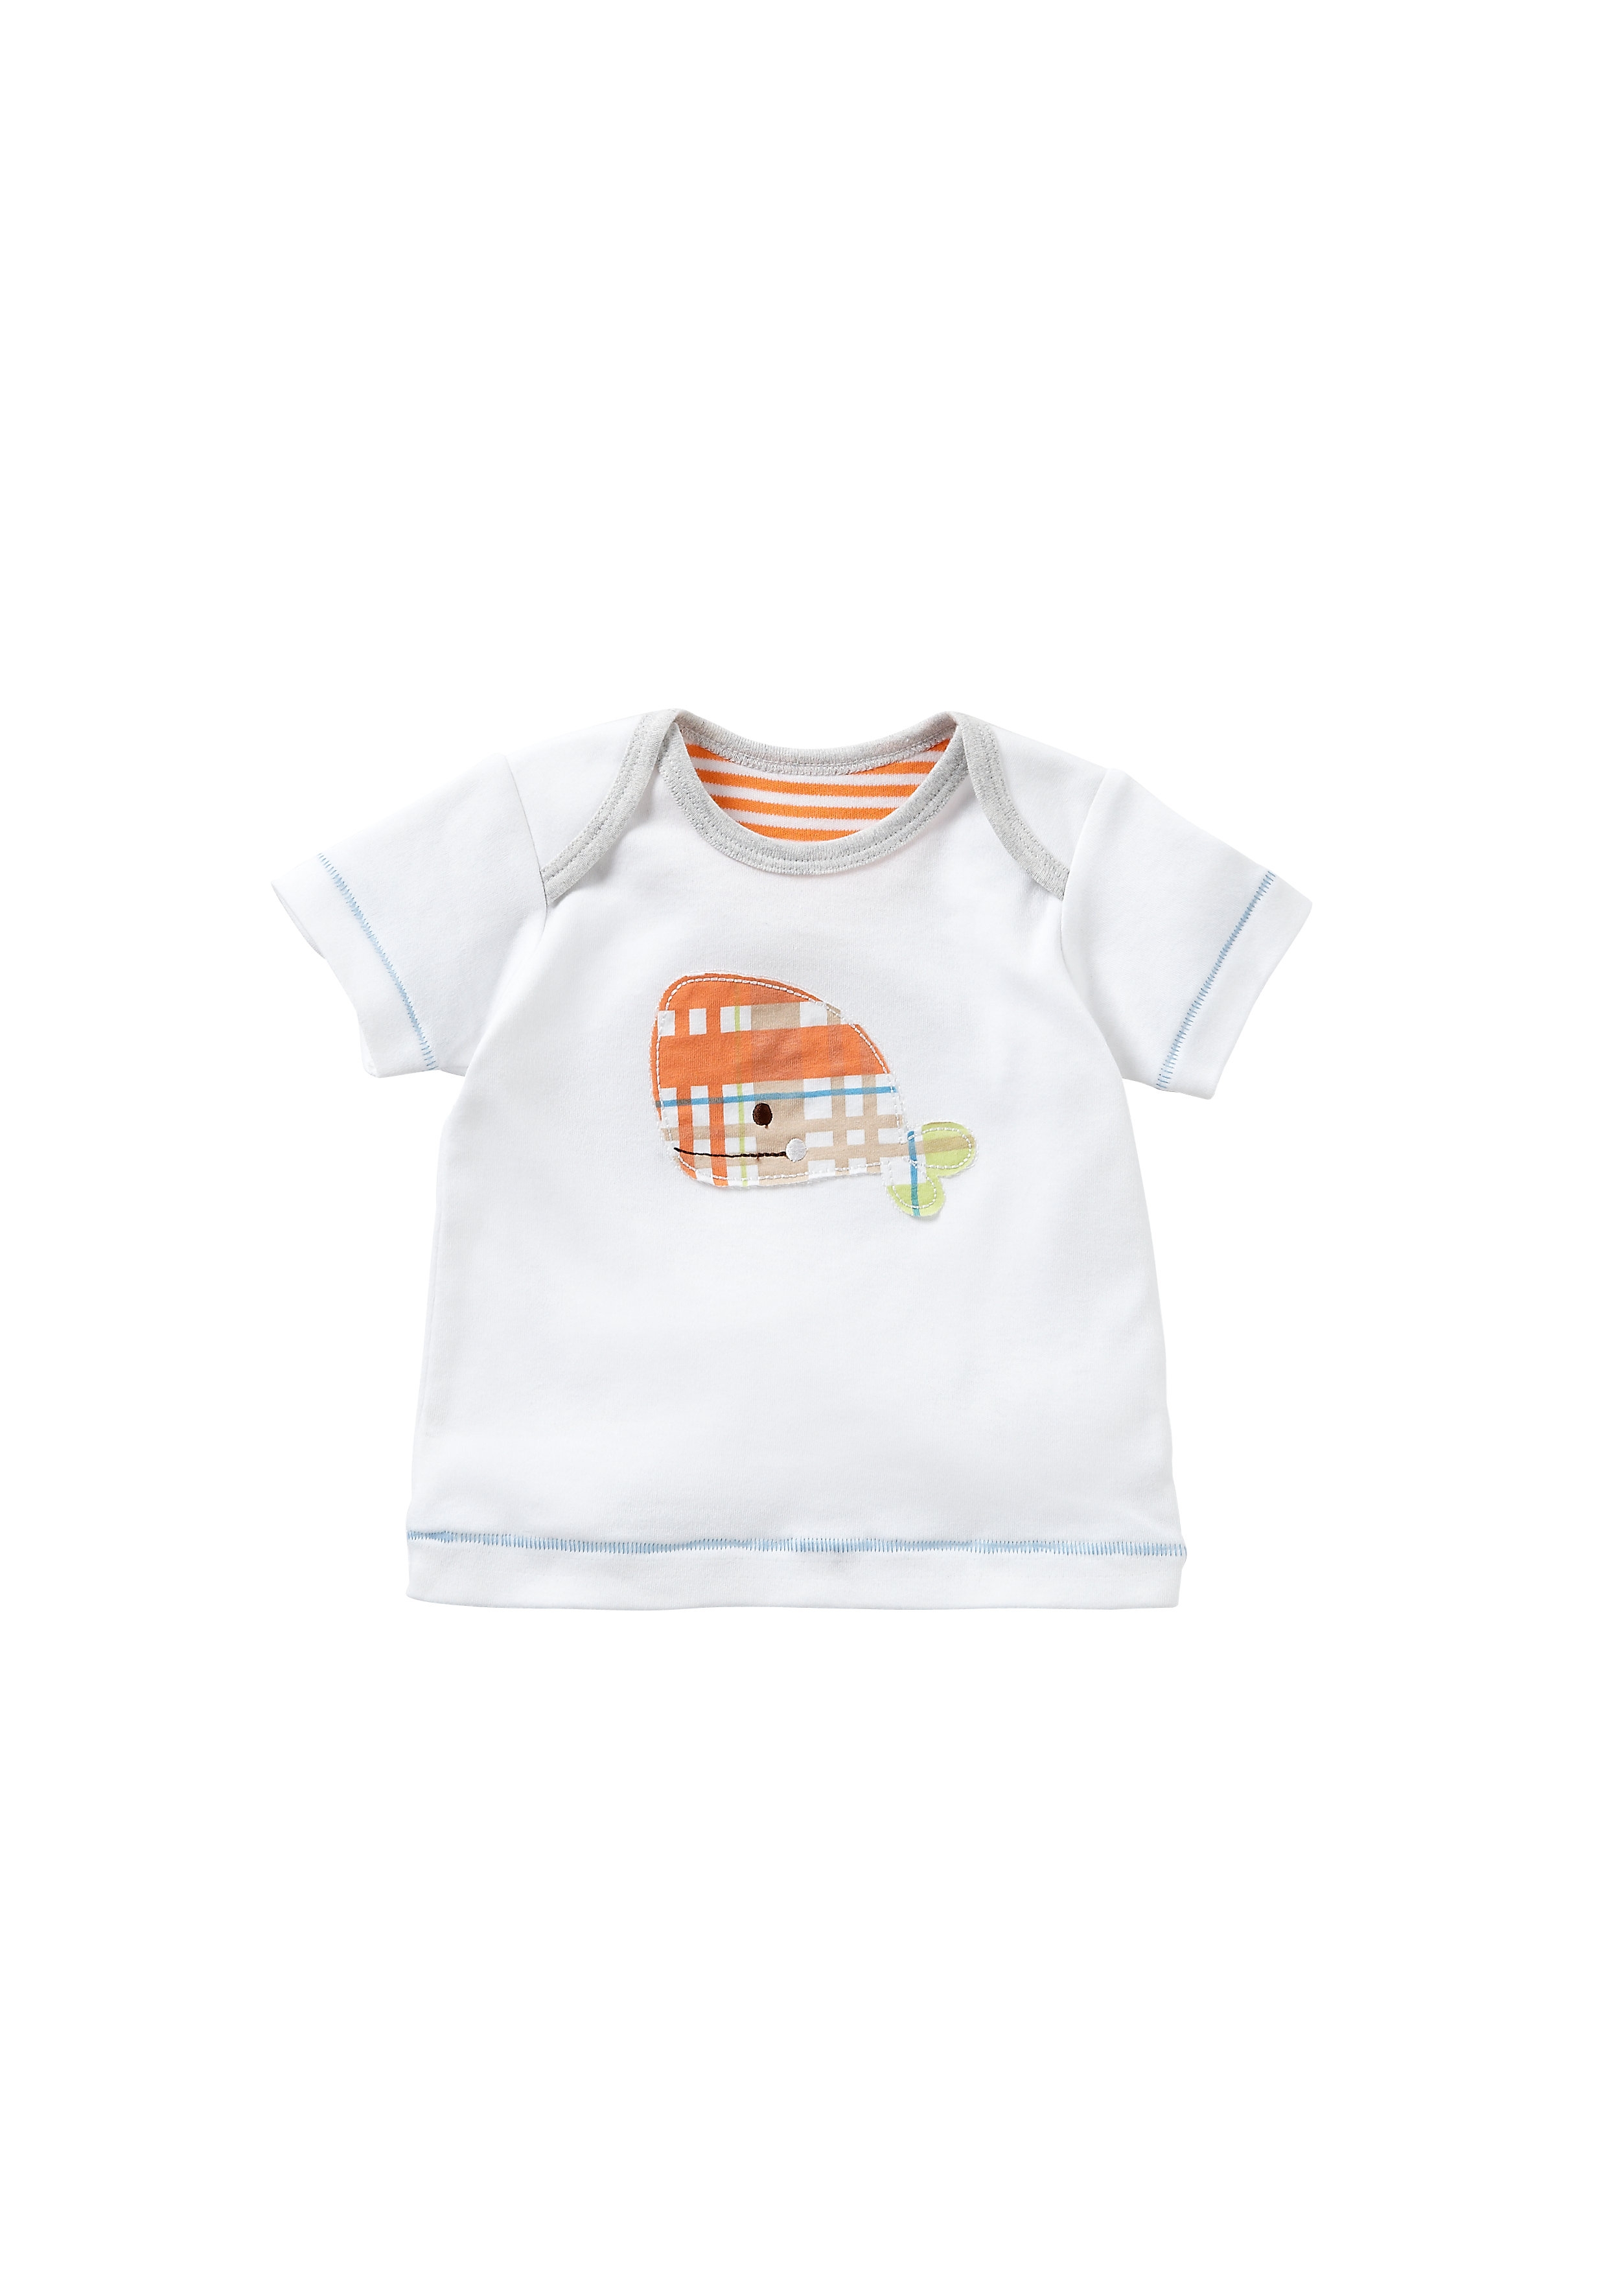 Mothercare | Boys Half Sleeves T-Shirt Whale Patchwork - White